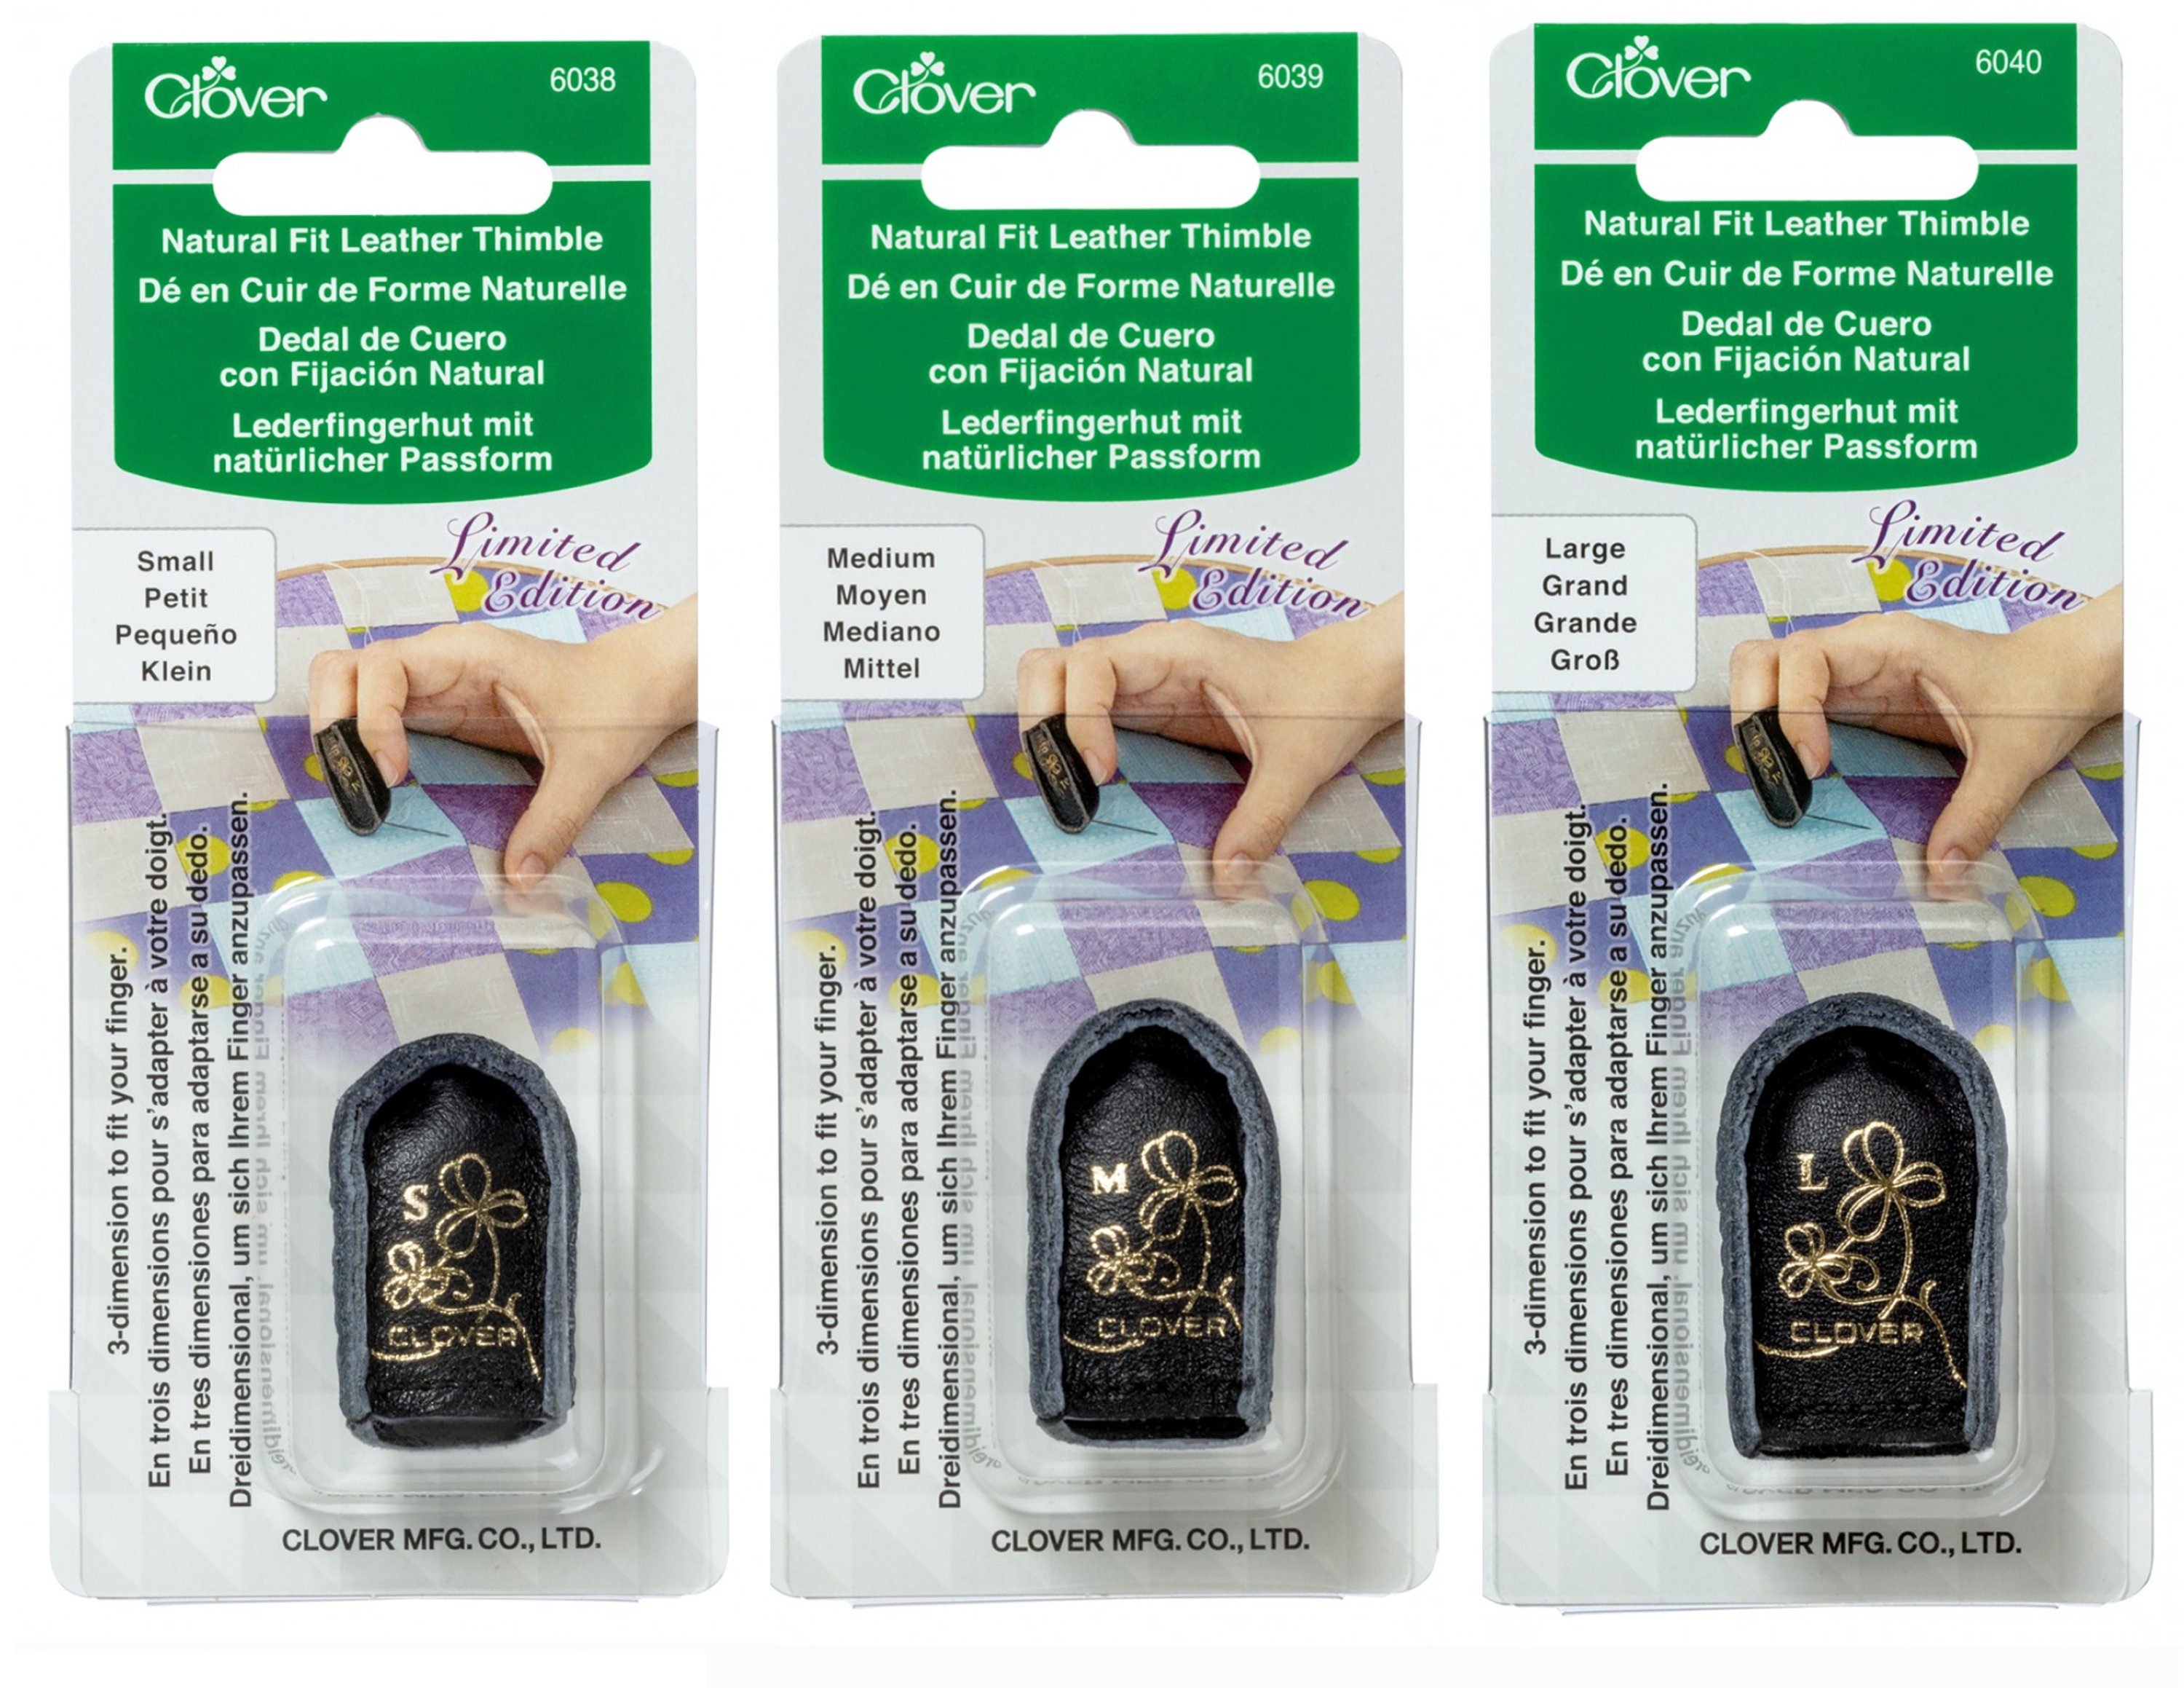 Clover Natural Fit Leather Thimble, sewing quilting patchwork Pick